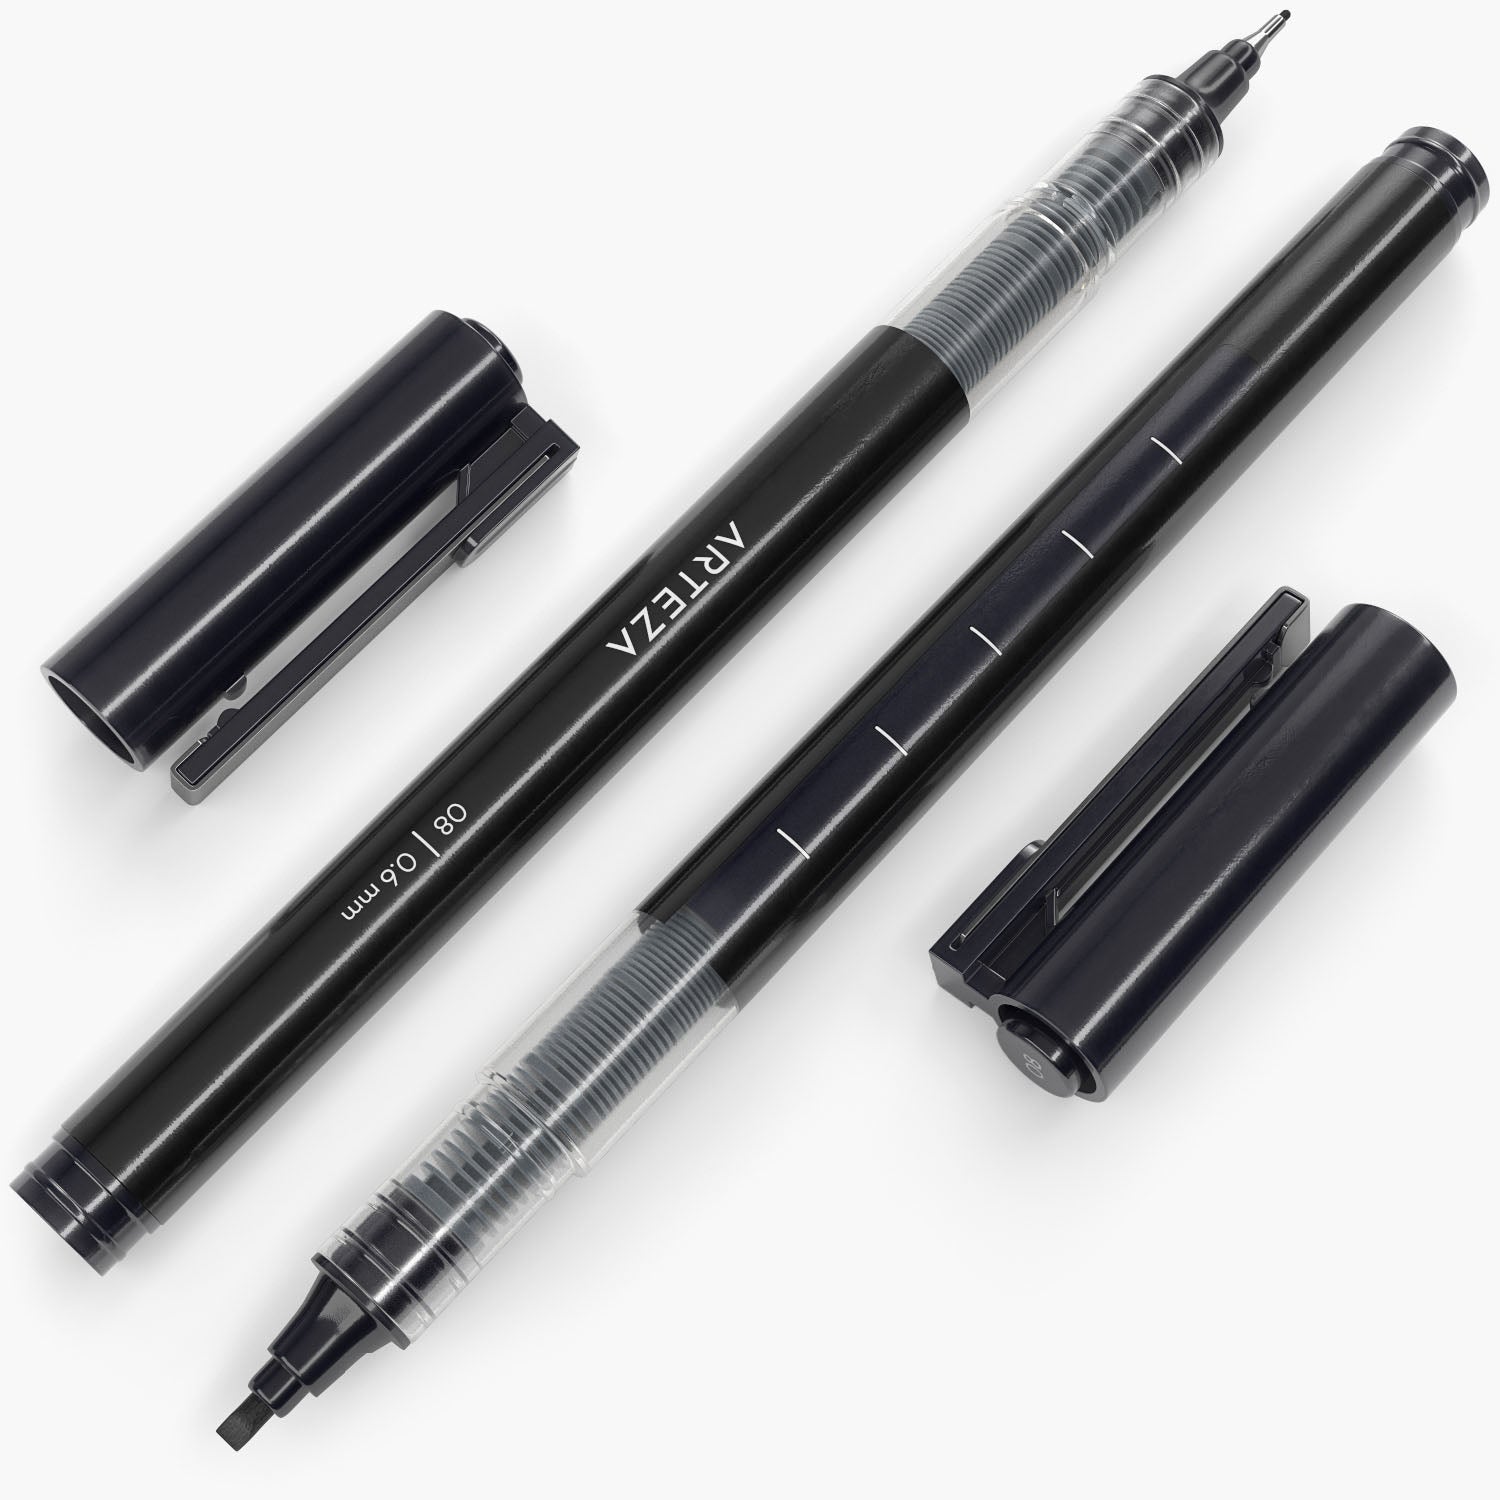 ARTEZA Micro-Line Ink Pens, Set of 5, Black Fineliners with Japanese  Archival Ink, Art Supplies for Comic Artists and Illustrators, Calligraphy